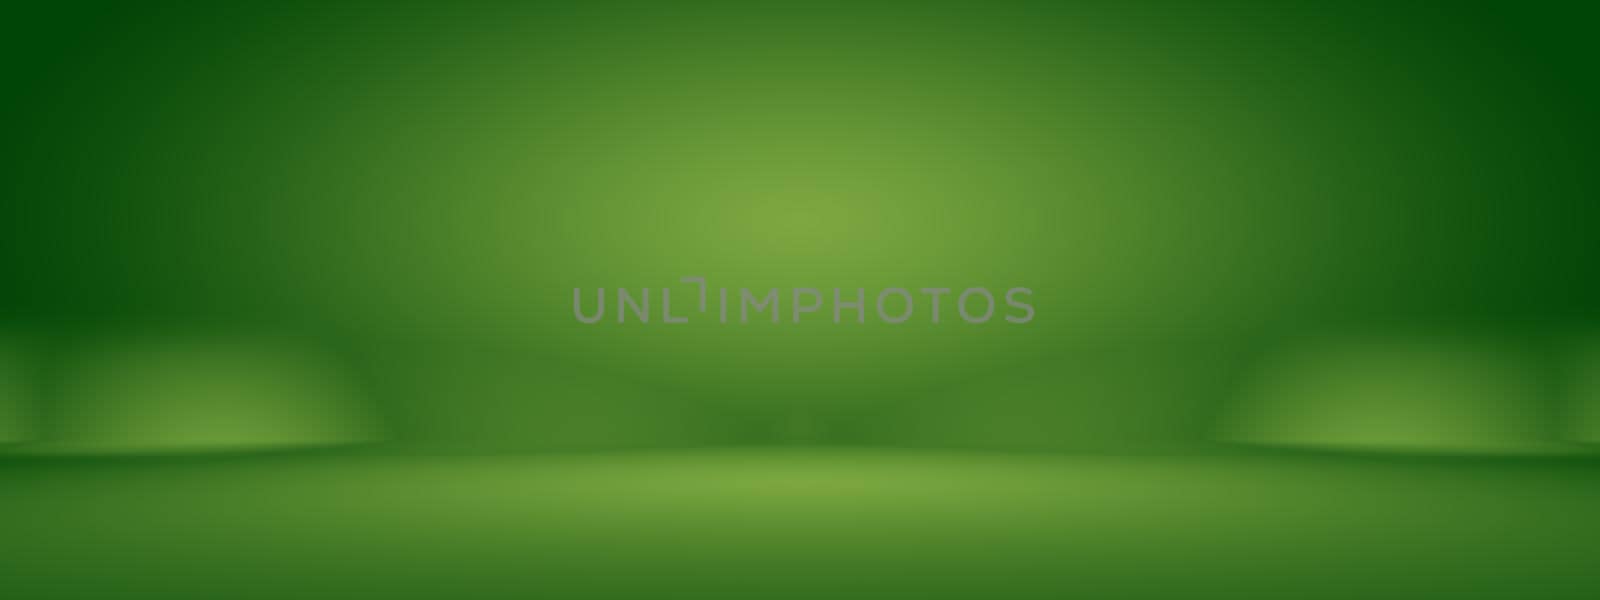 Abstract blur empty Green gradient Studio well use as background,website template,frame,business report.